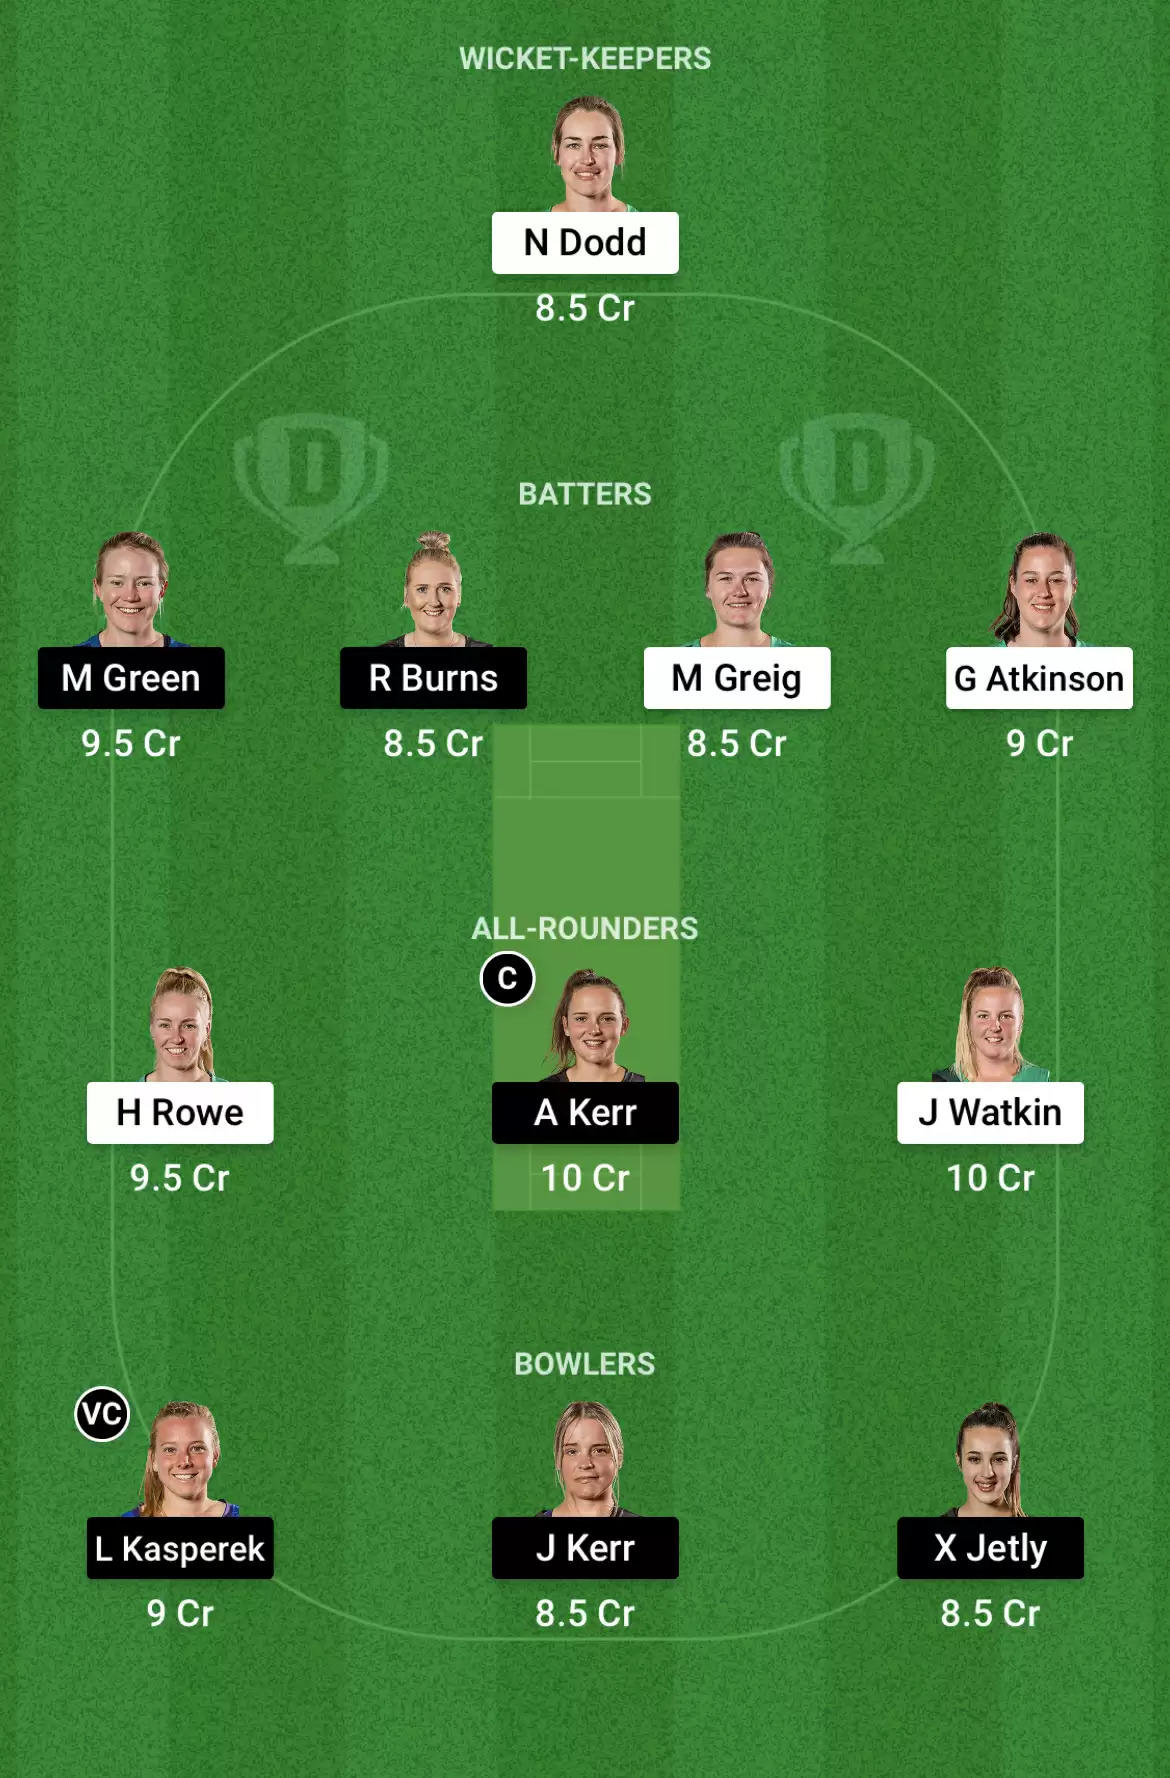 CH-W vs WB-W Dream11 Prediction for Women’s Super Smash T20 2021/22: Playing XI, Fantasy Cricket Tips, Team, Weather Updates and Pitch Report